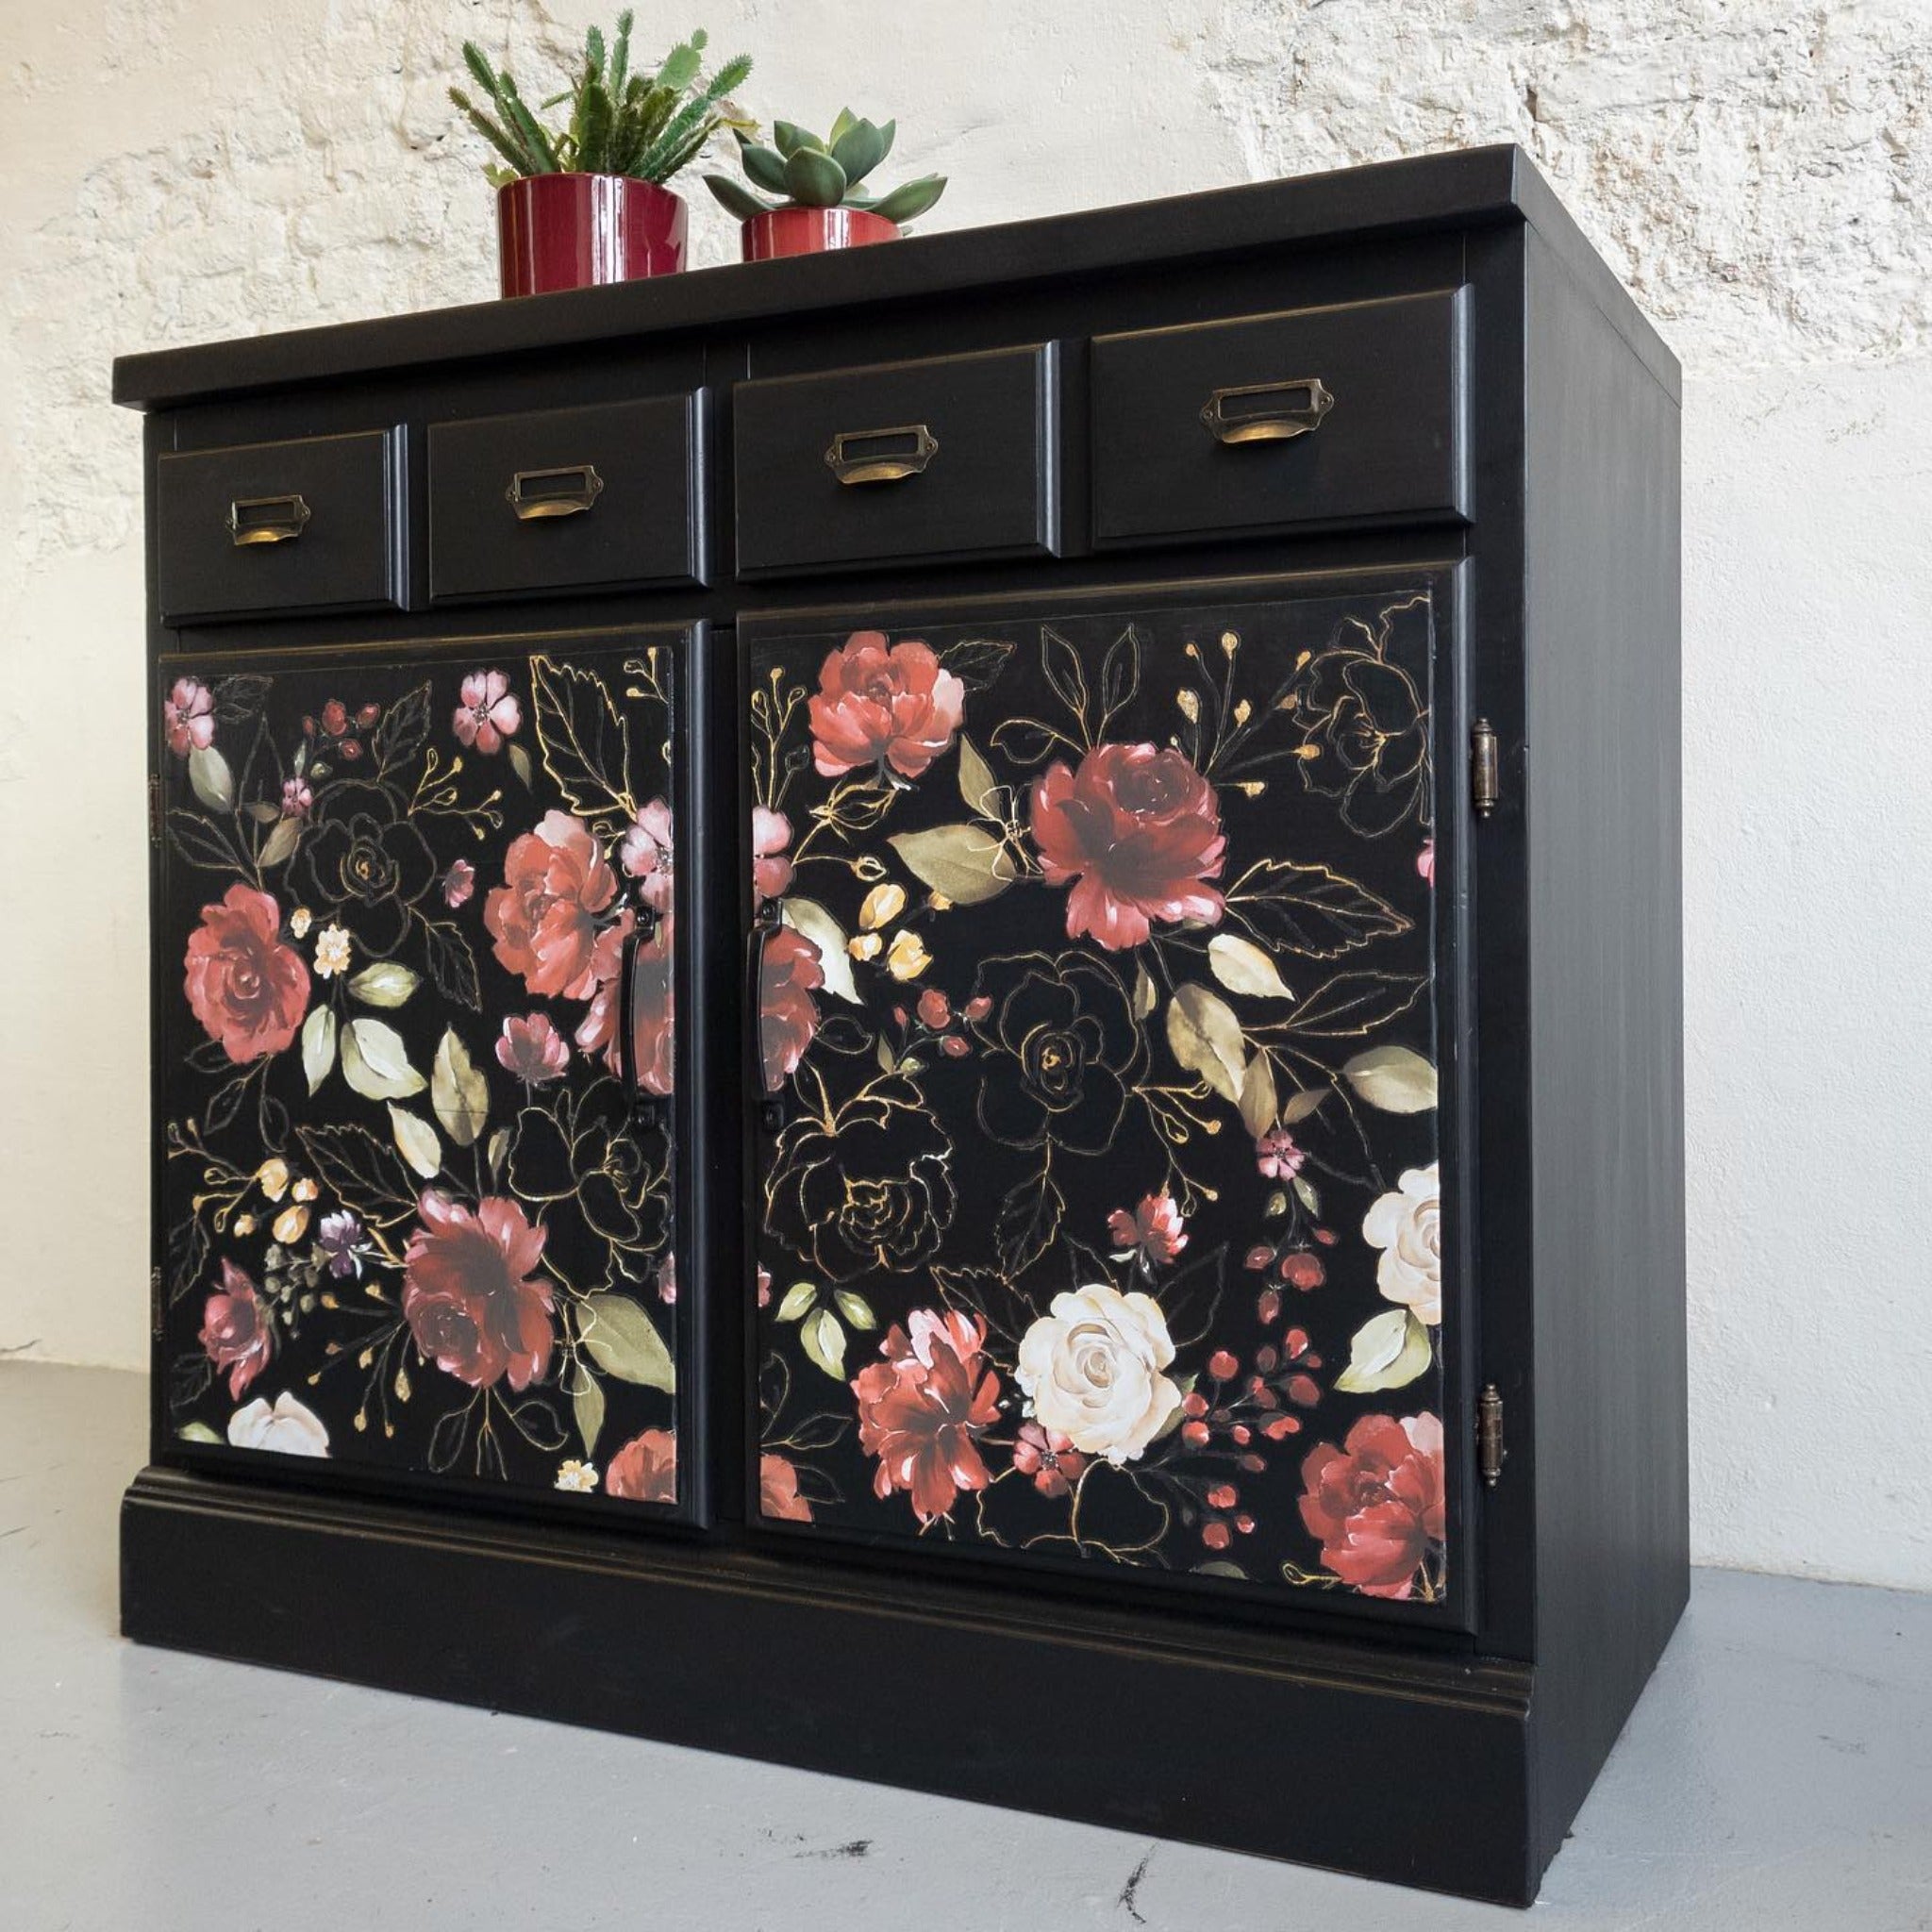 A vintage small buffet table with 4 small drawers and 2 large doors is painted black and features ReDesign with Prima's Midnight Floral transfer on the doors.